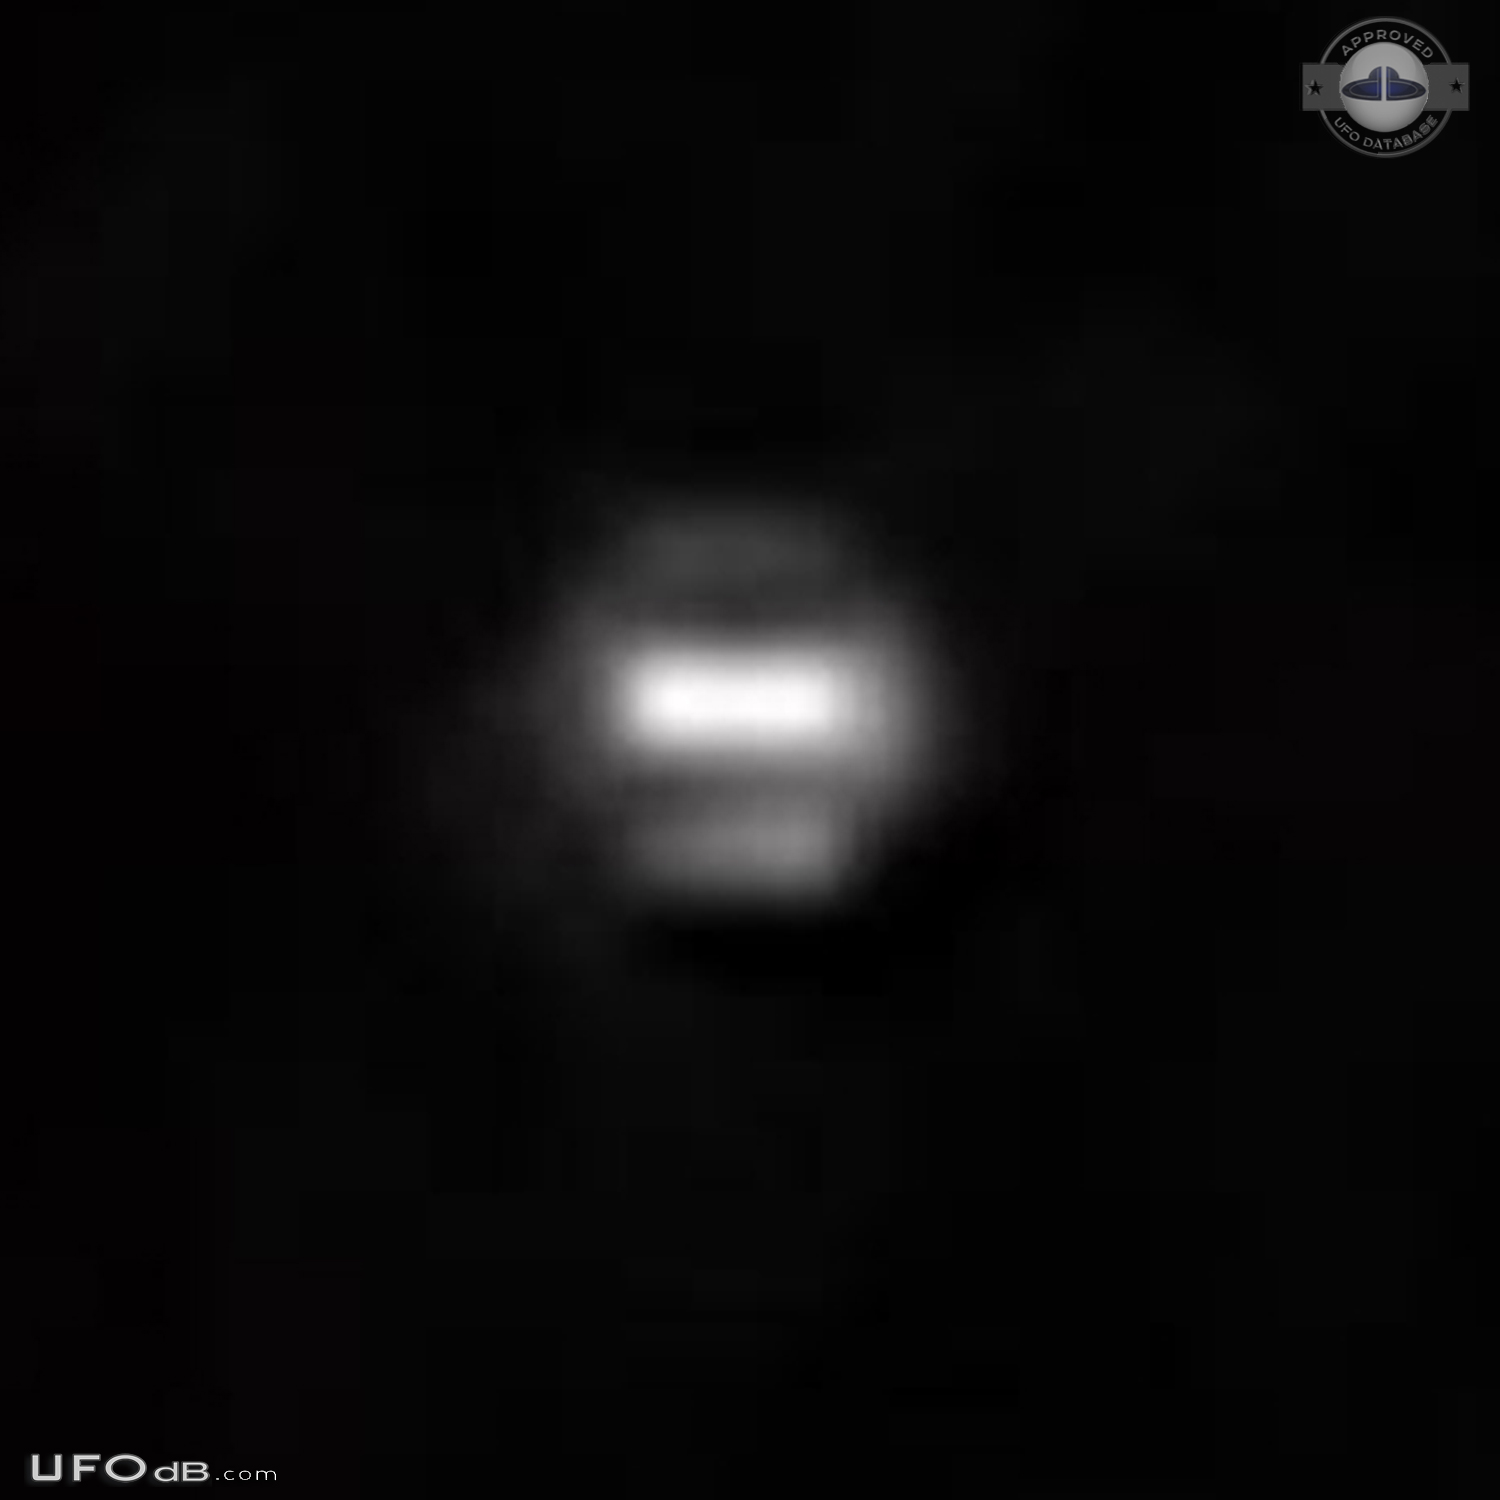 Airplane Passenger UFO sighting from Phoenix Bound Plan March 2015 UFO Picture #661-3